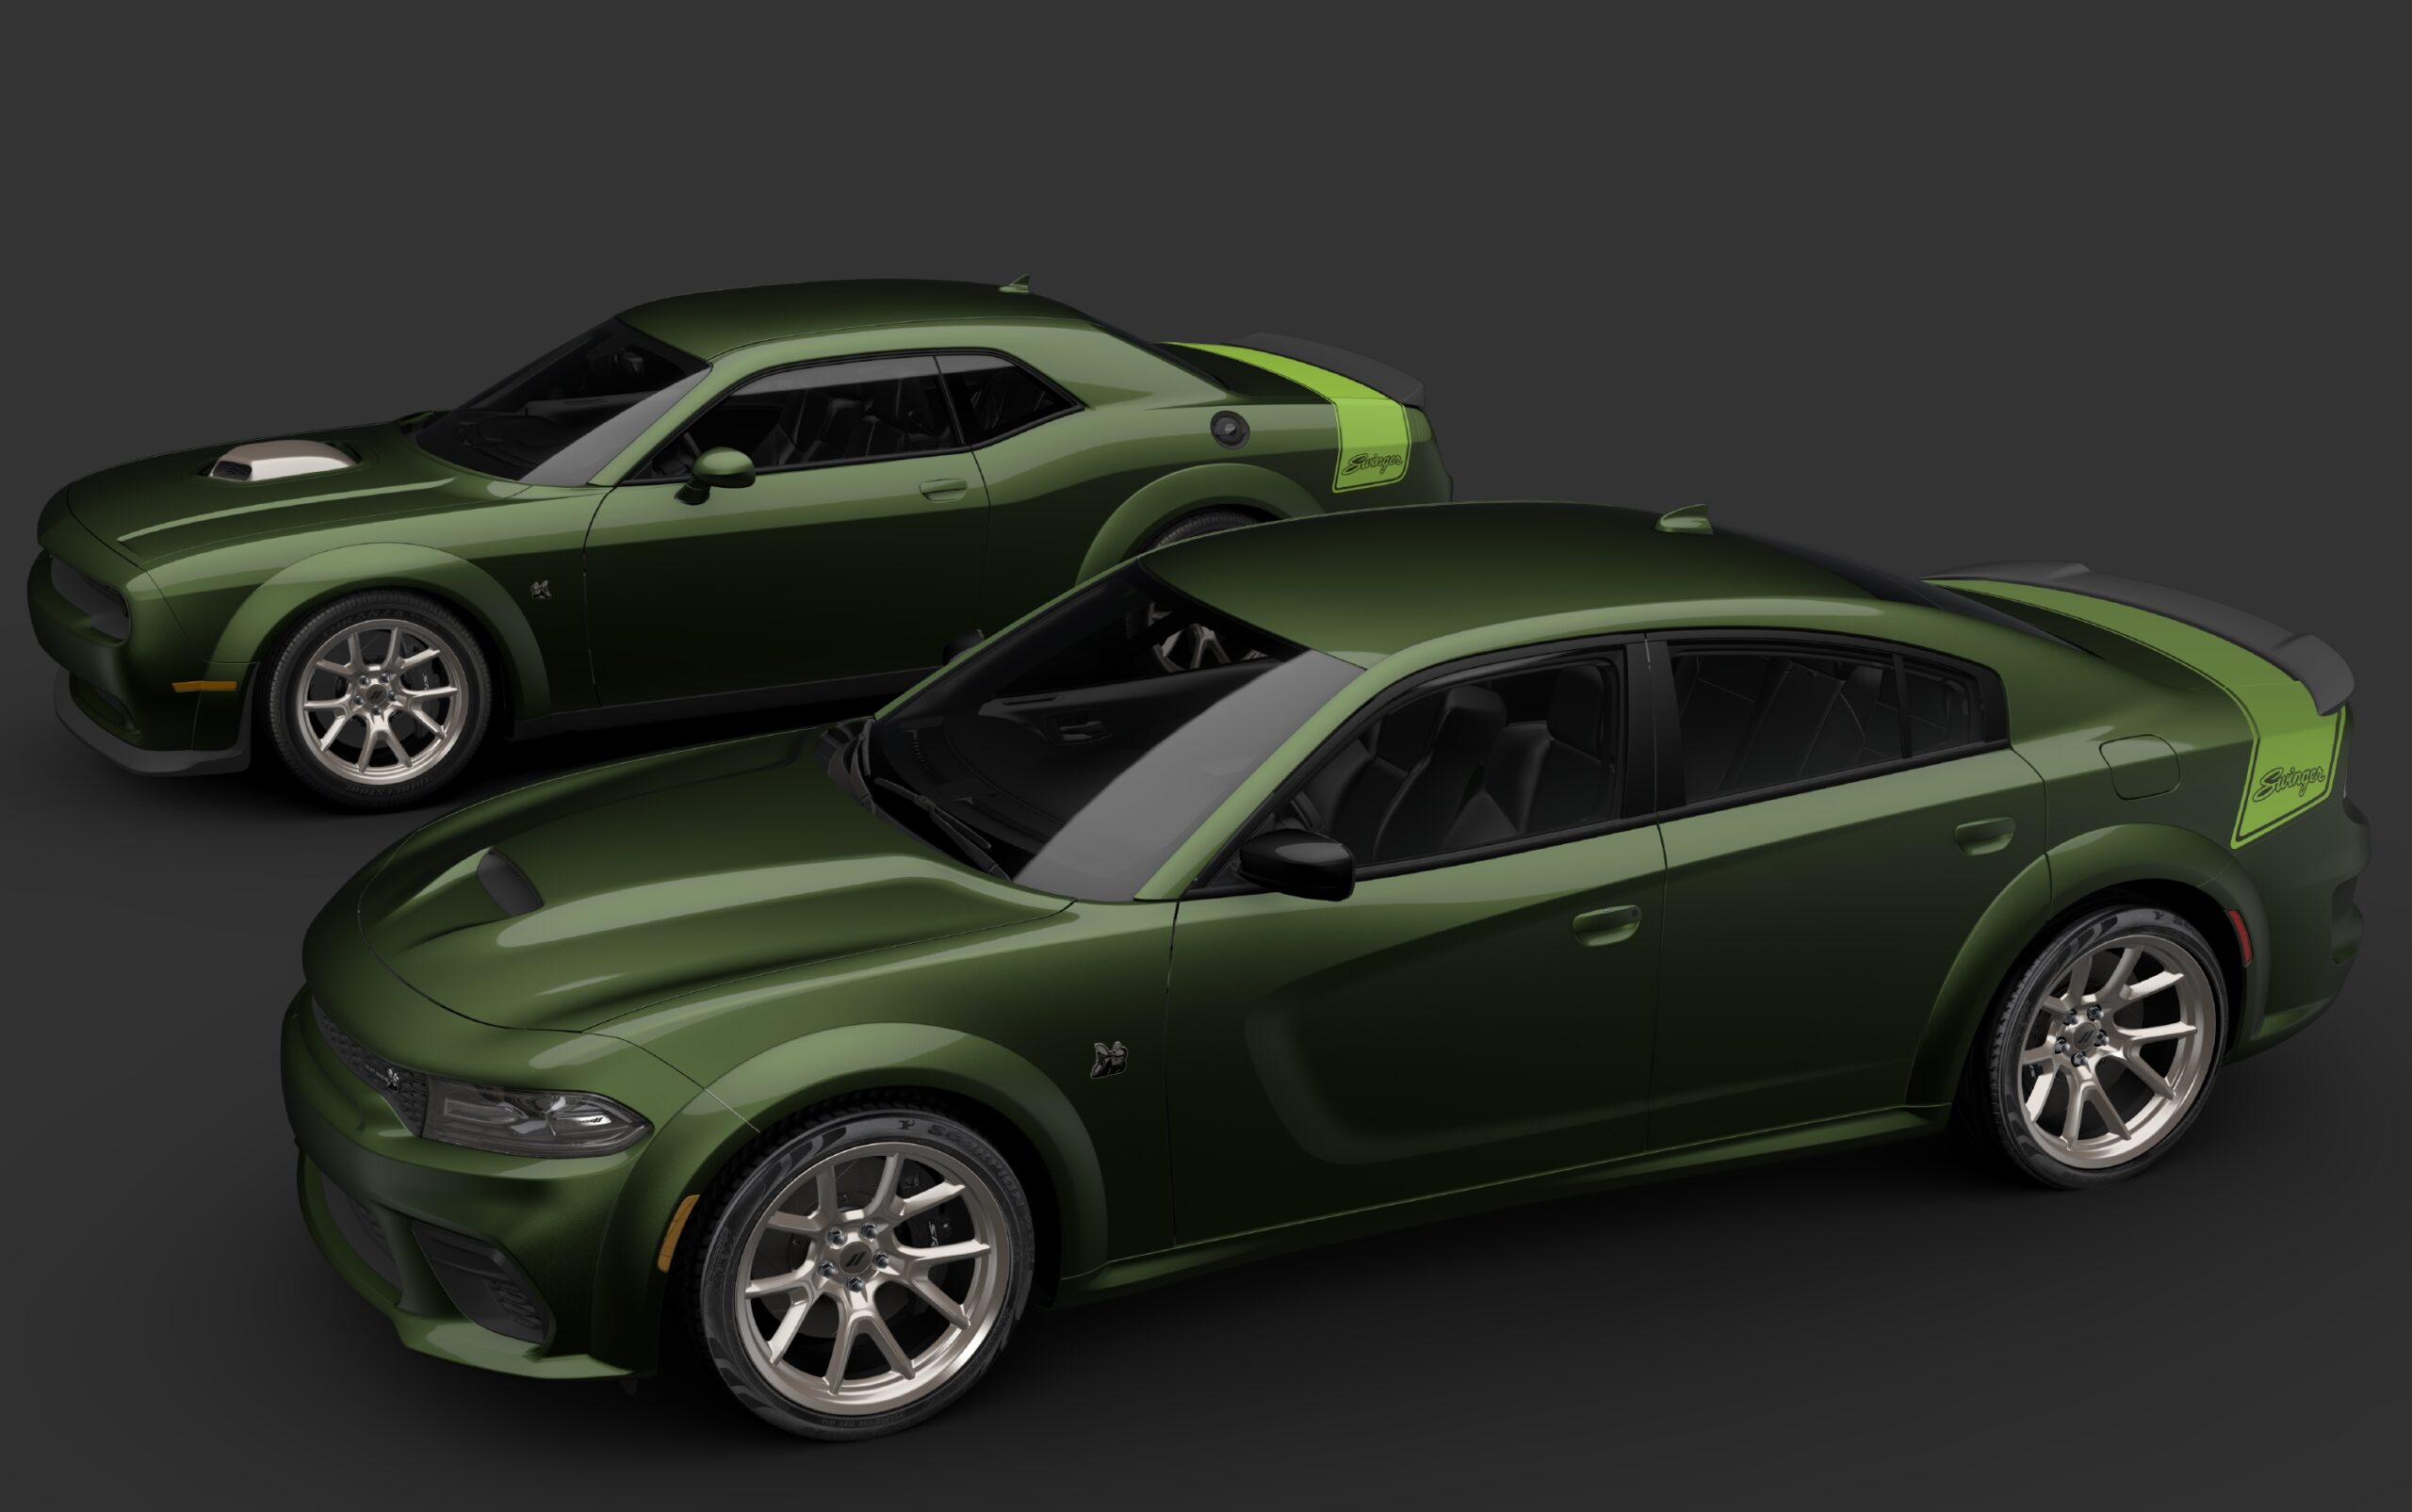 Dodge Challenger, Charger R/T Scat Pack Swinger Models Add to ‘Last Call’ Lineup | THE SHOP